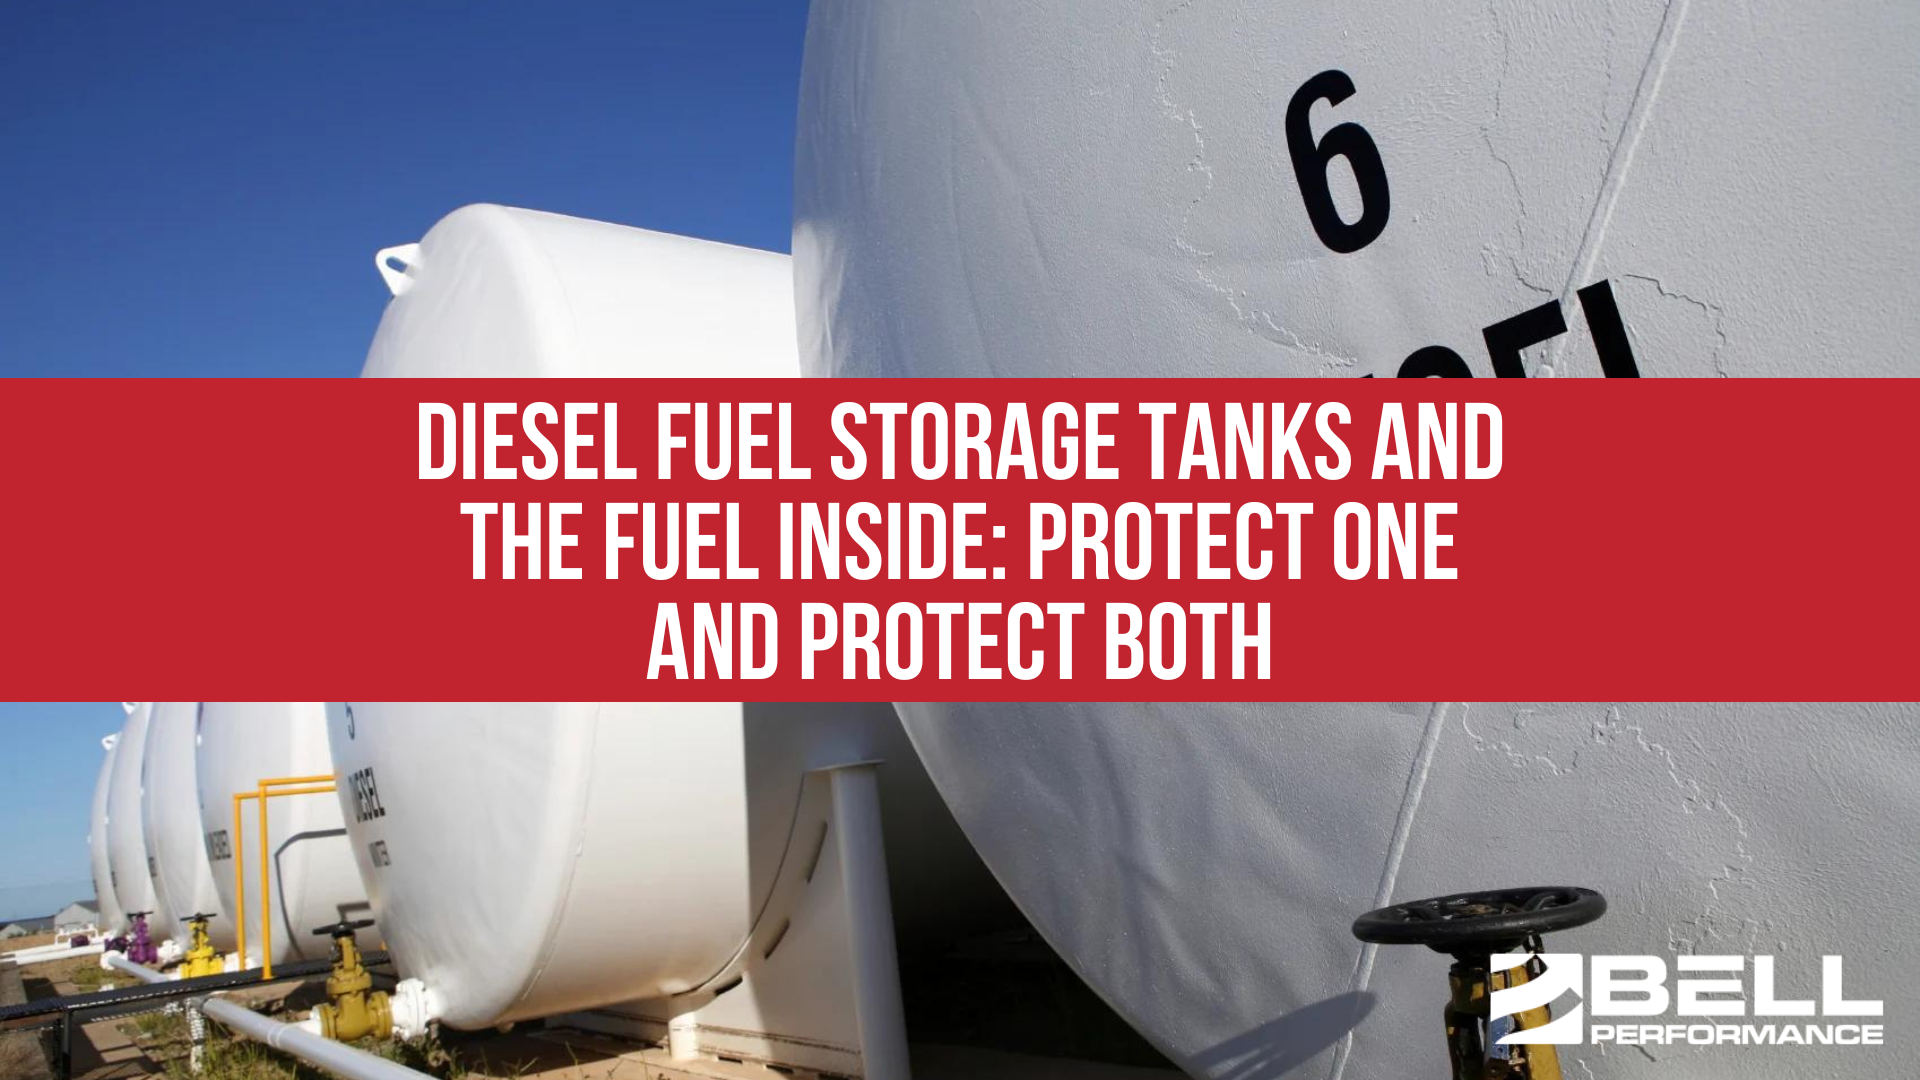 Diesel Fuel Storage Tanks and the Fuel Inside: Protect one and Protect Both